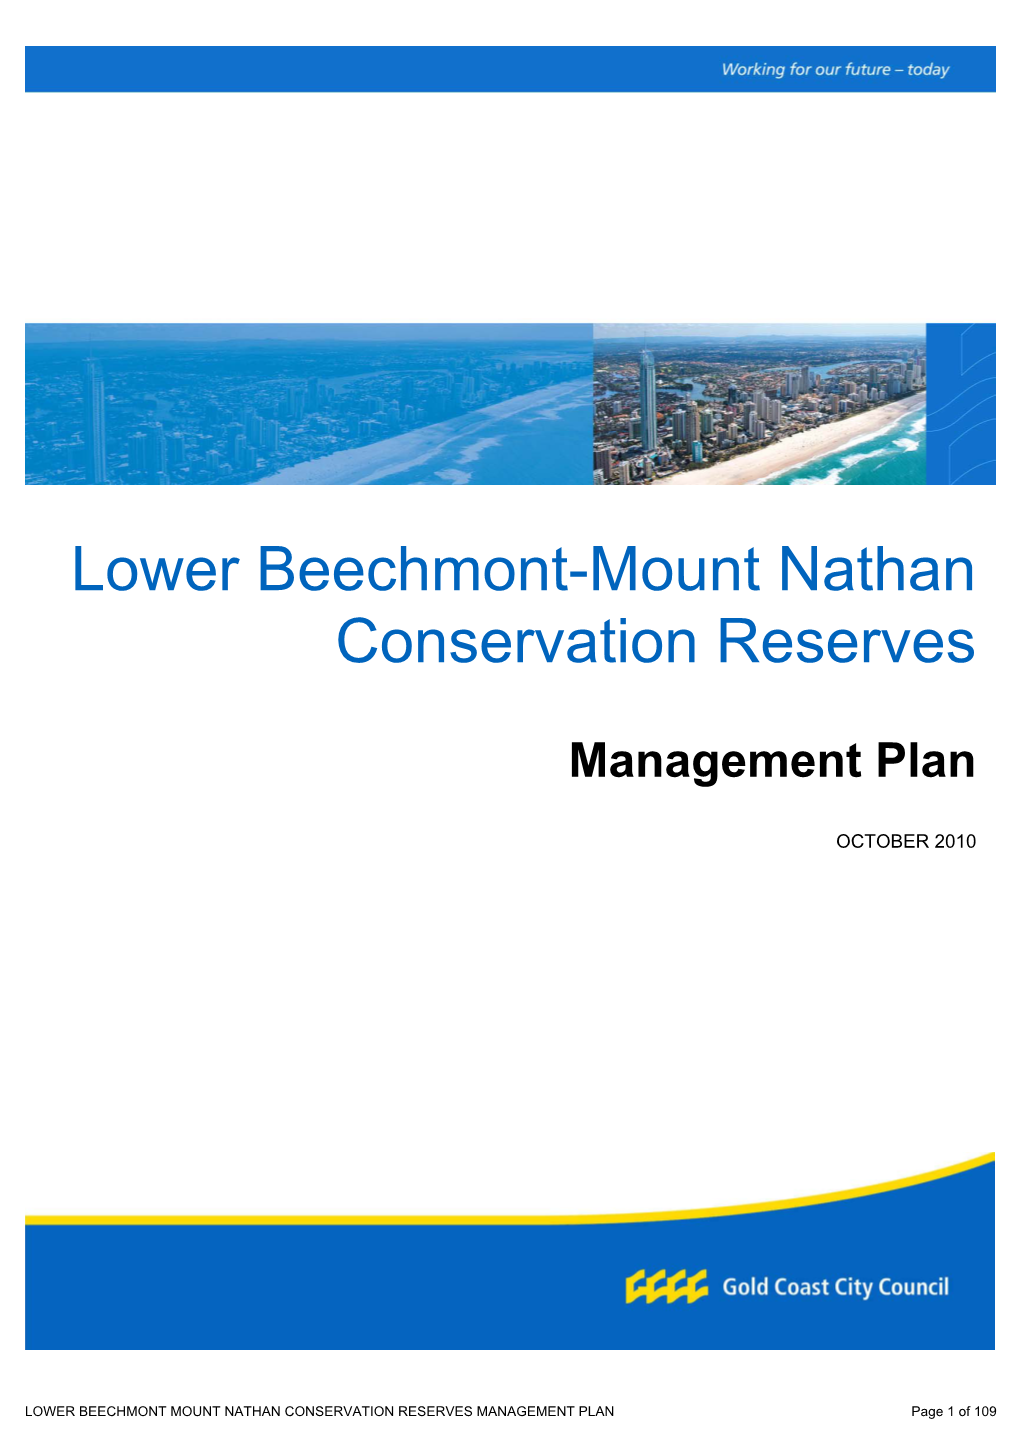 Lower Beechmont-Mount Nathan Conservation Reserves